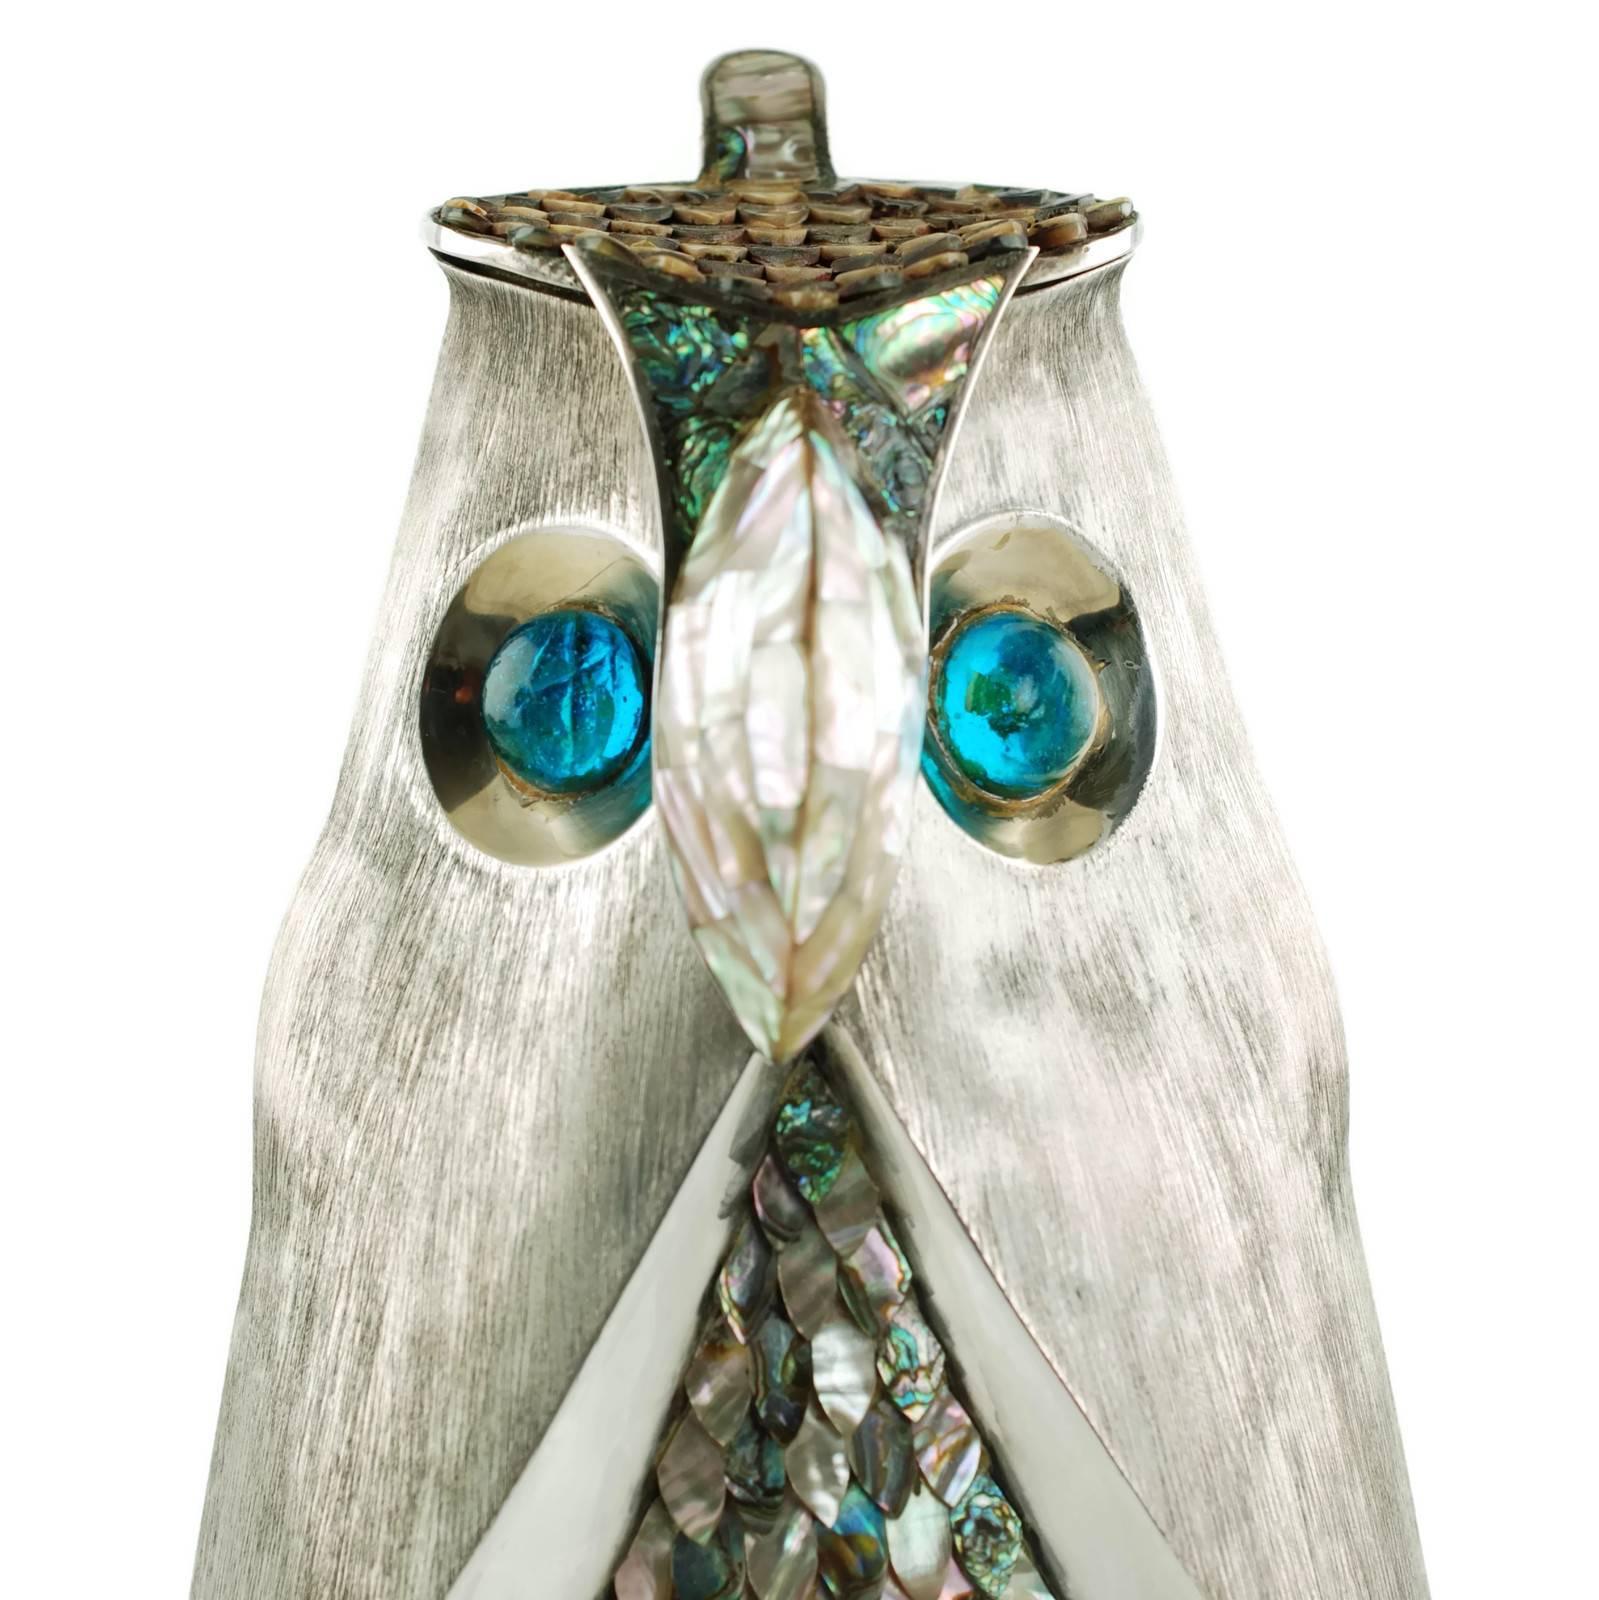 Brushed Los Castillo Silver Plate Figural Owl Pitcher with Abalone Inlay and Glass Eyes